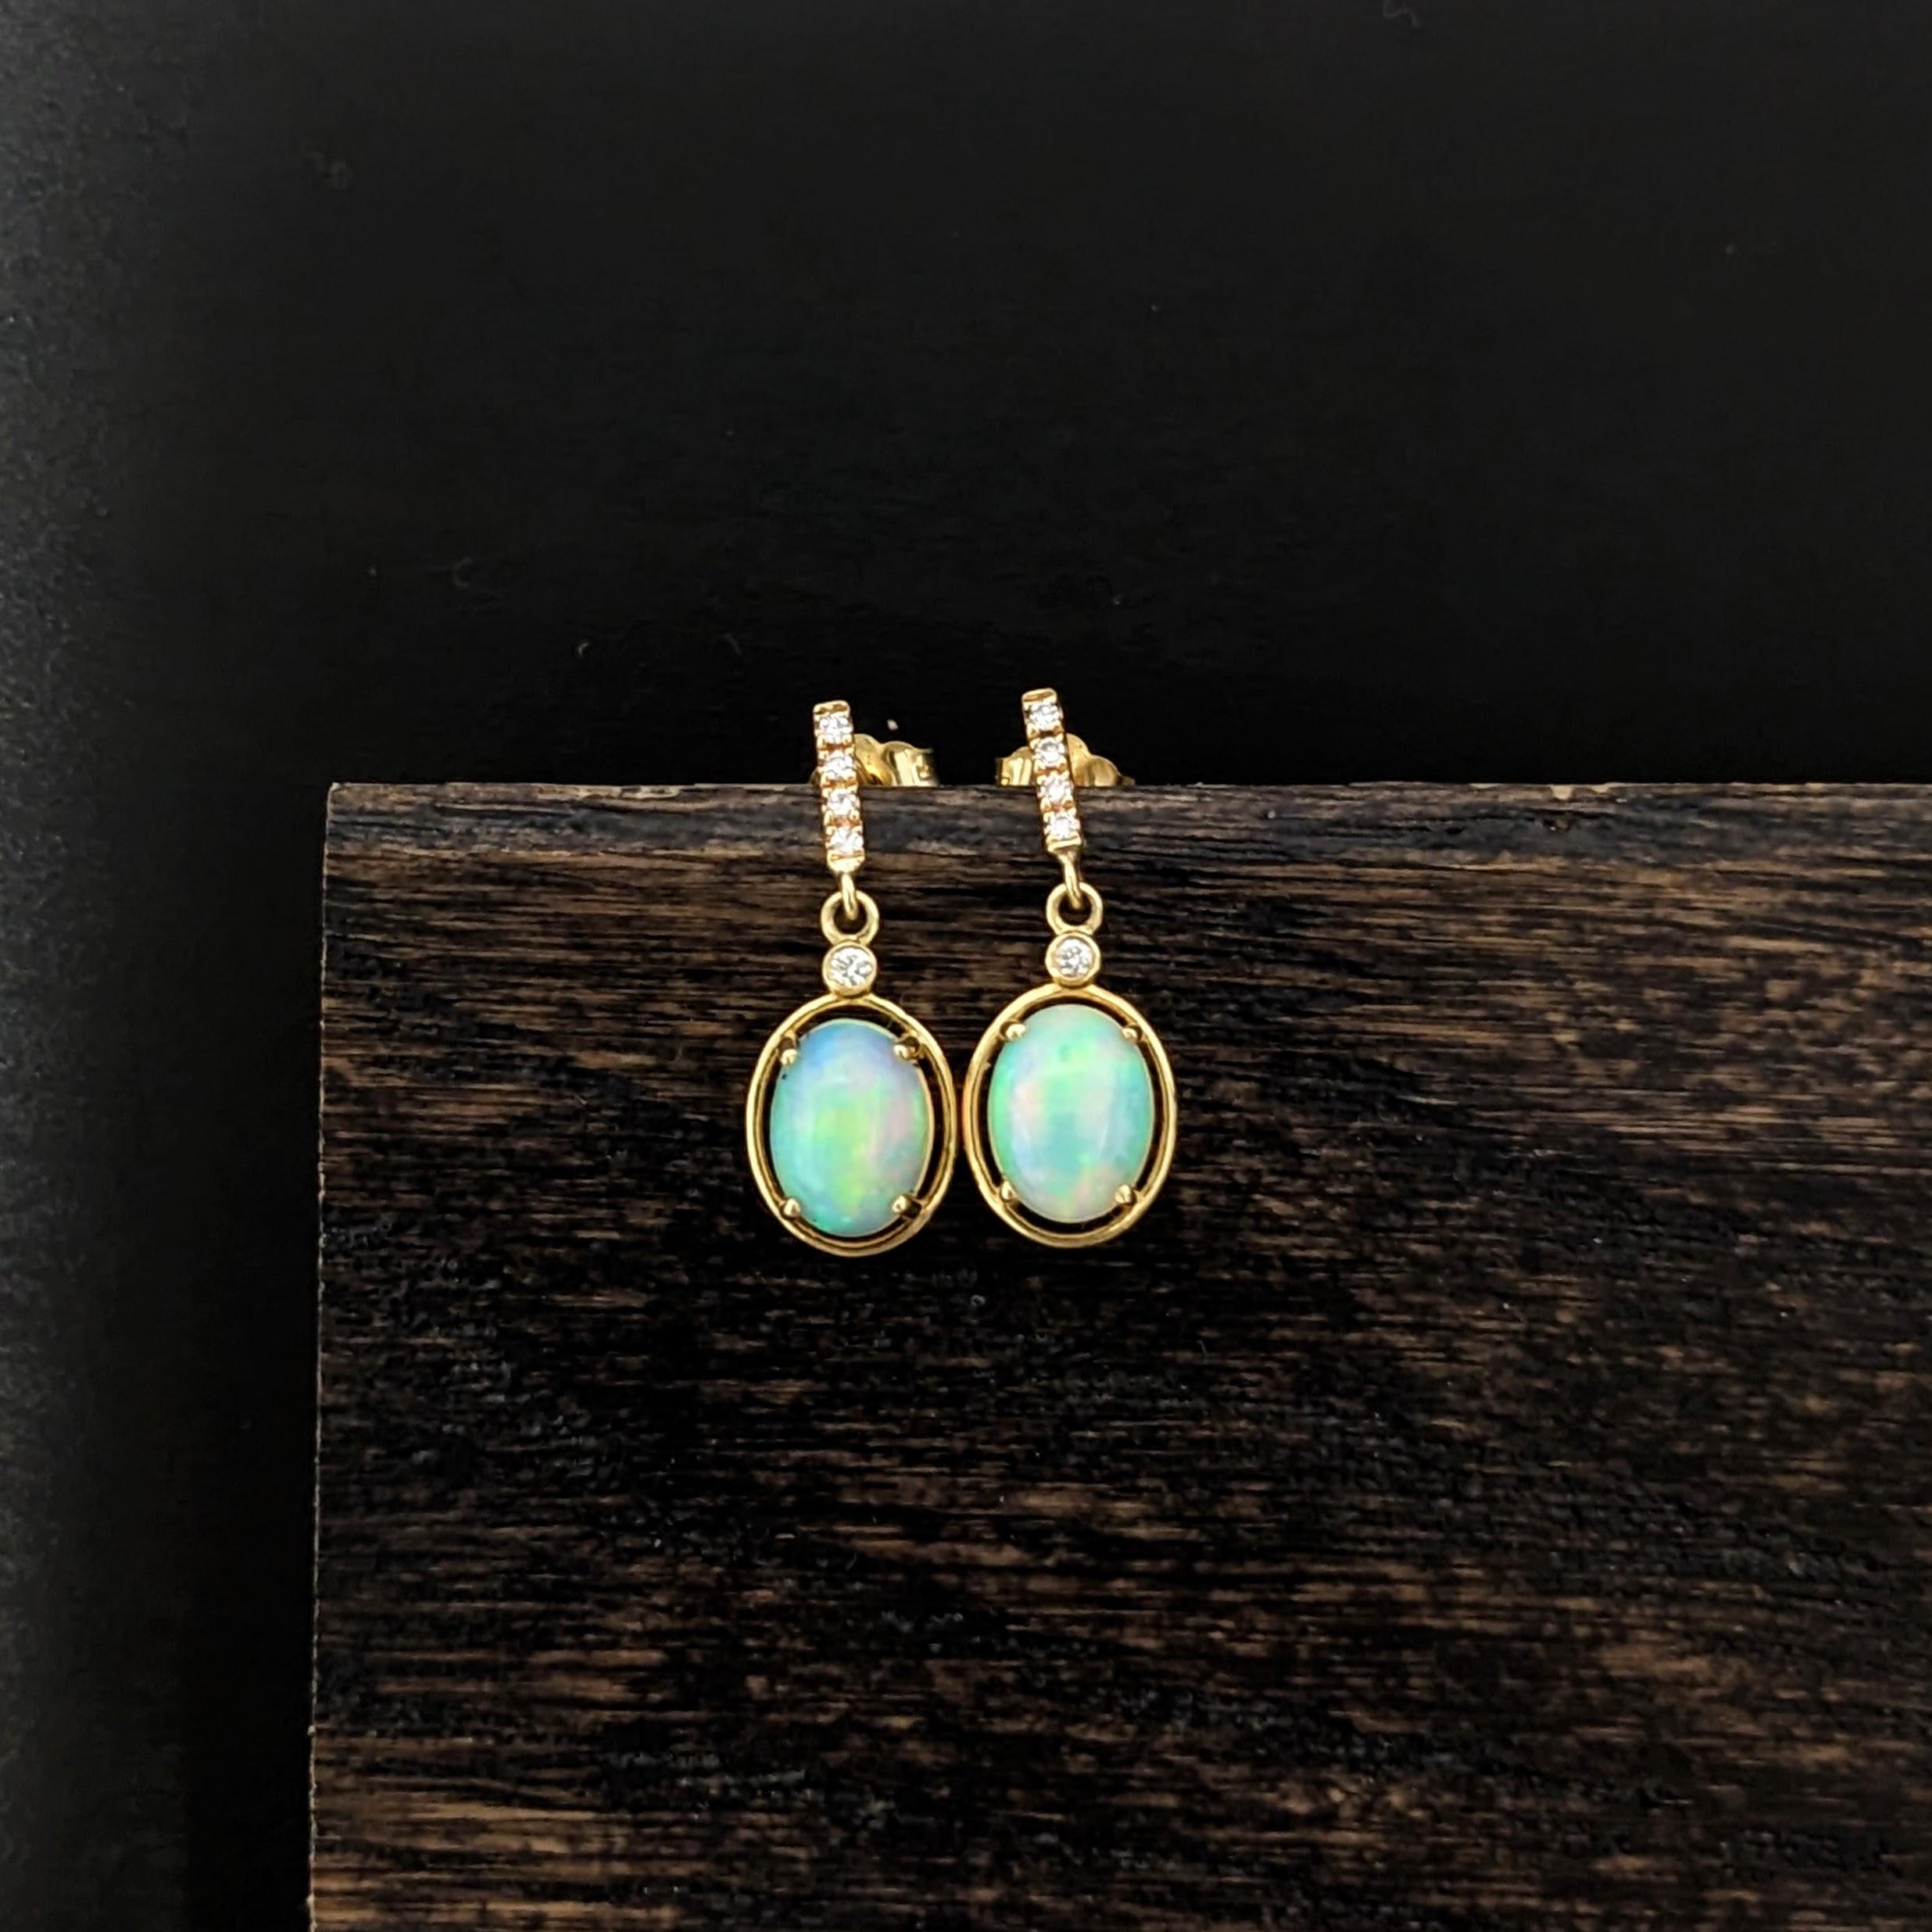 Lovely natural earth mined opal pear drop earrings in 14k gold with diamond accents. A latch backing makes for easy and comfortable wear.

Specifications

Item Type: Earrings
Center Stone: Opal
Treatment: None
Weight: 1.63ct (2)
Shape: